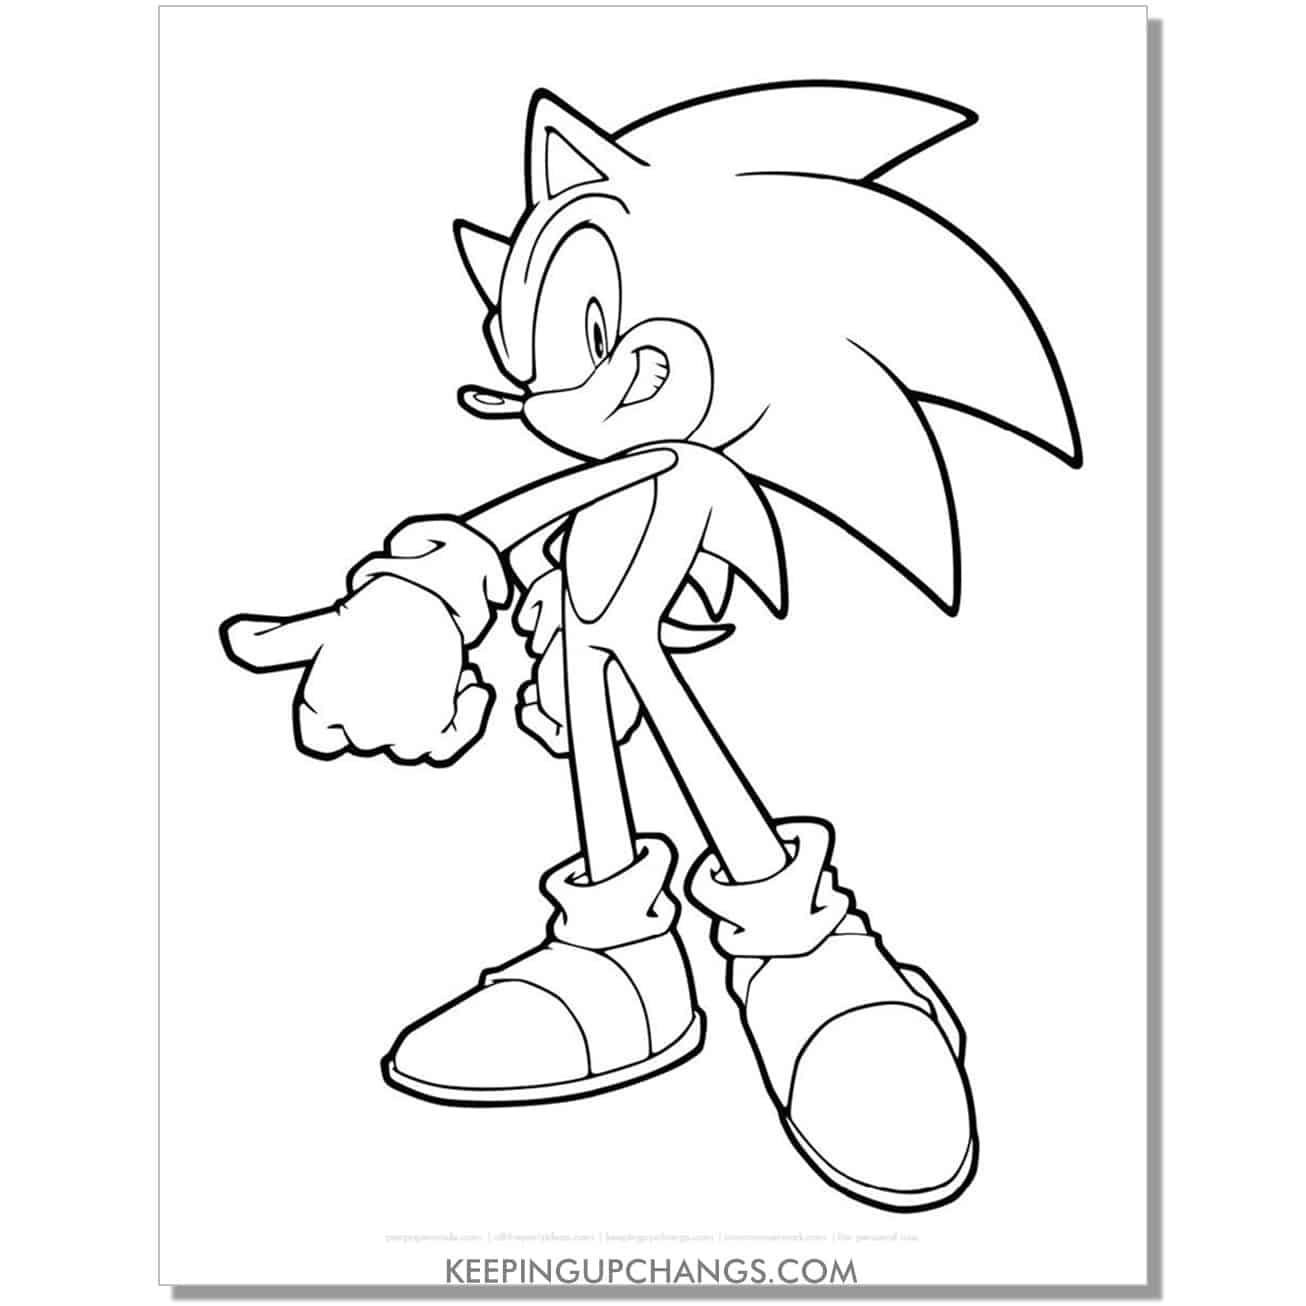 sonic pointing thumb out in front of body coloring page.